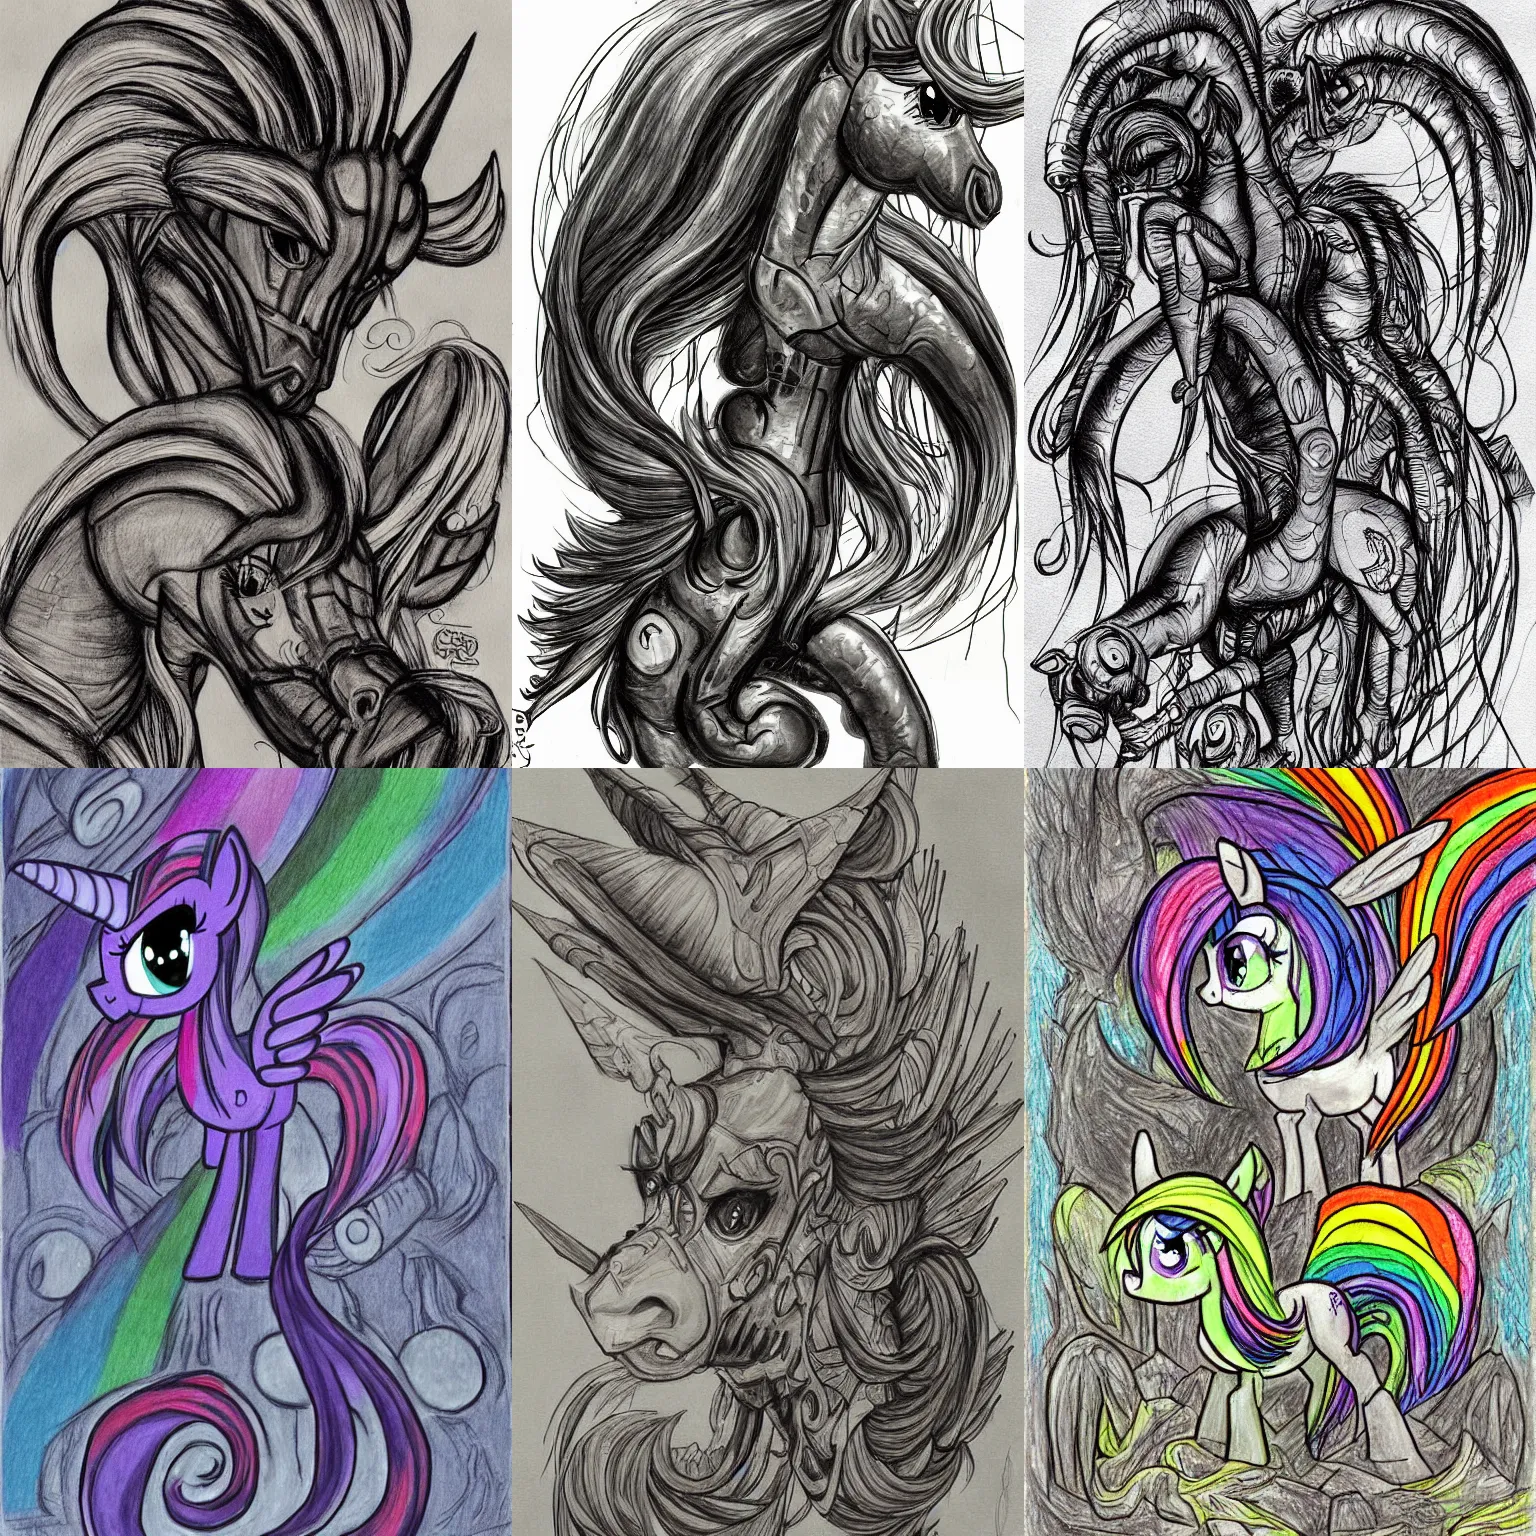 Prompt: my little pony drawn by h. r. giger, wholesome art, fun art, rainbows, a digital art, very detailed, in style of h. r. giger, mate painting, smooth